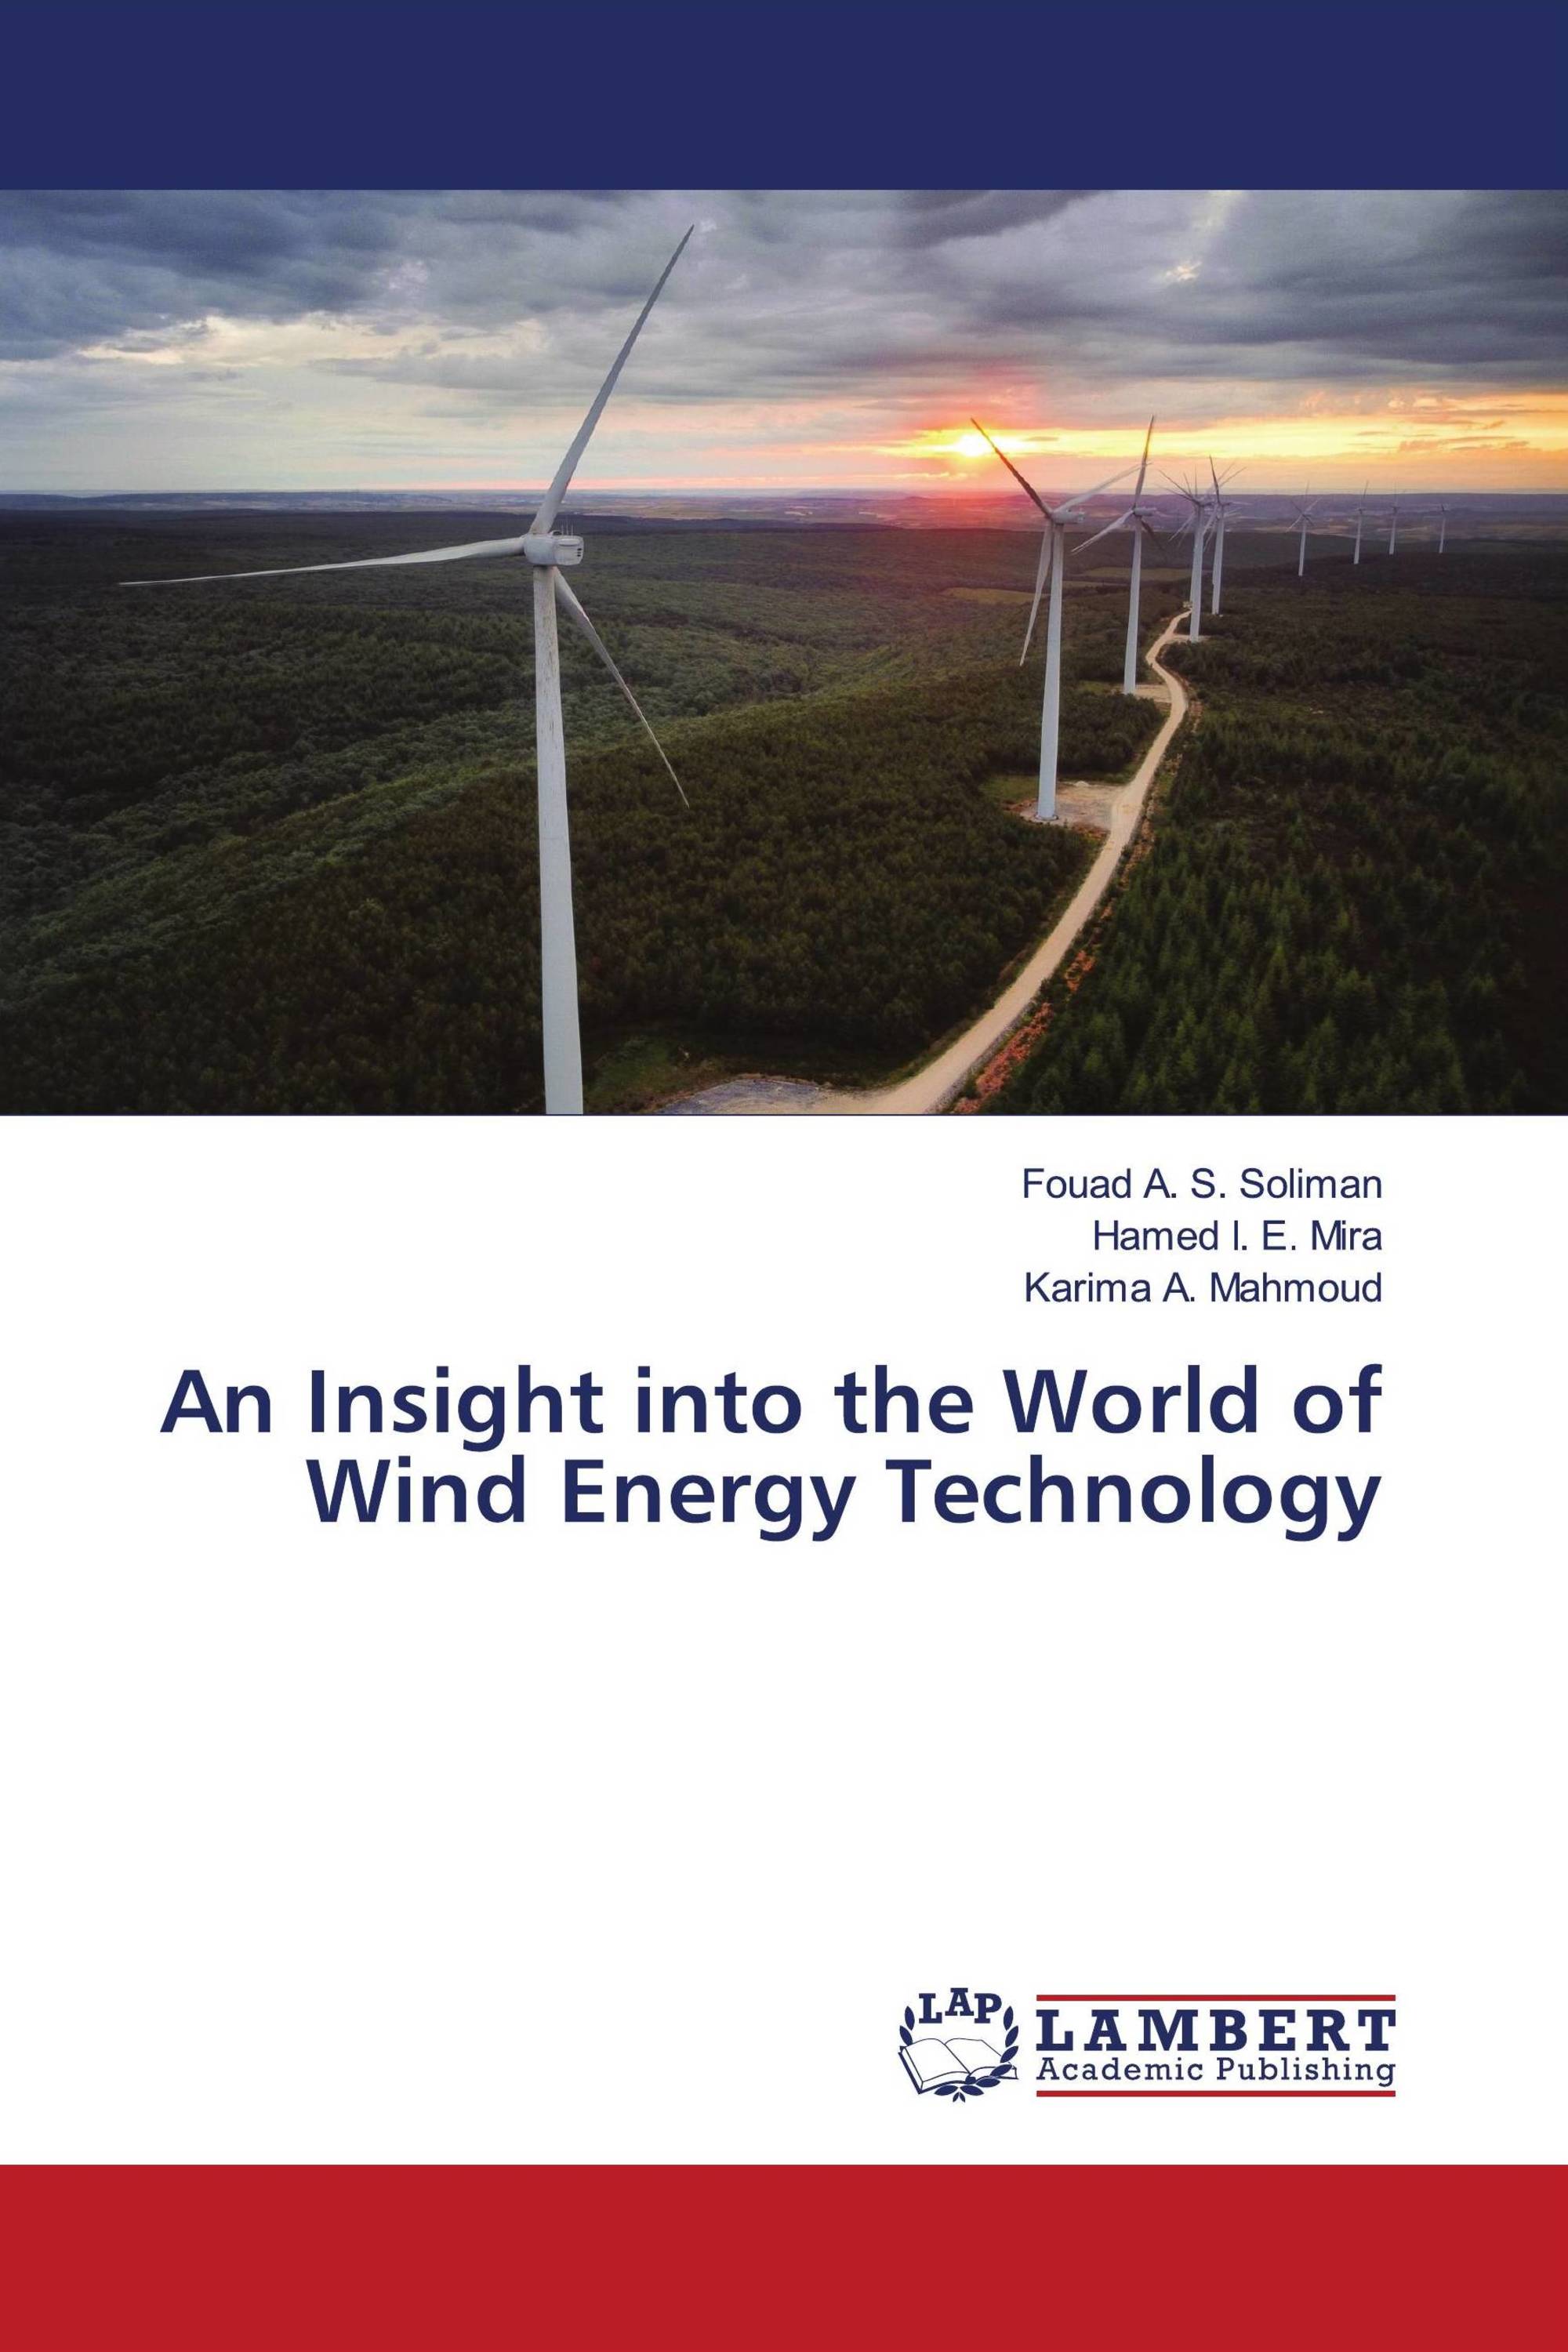 An Insight into the World of Wind Energy Technology